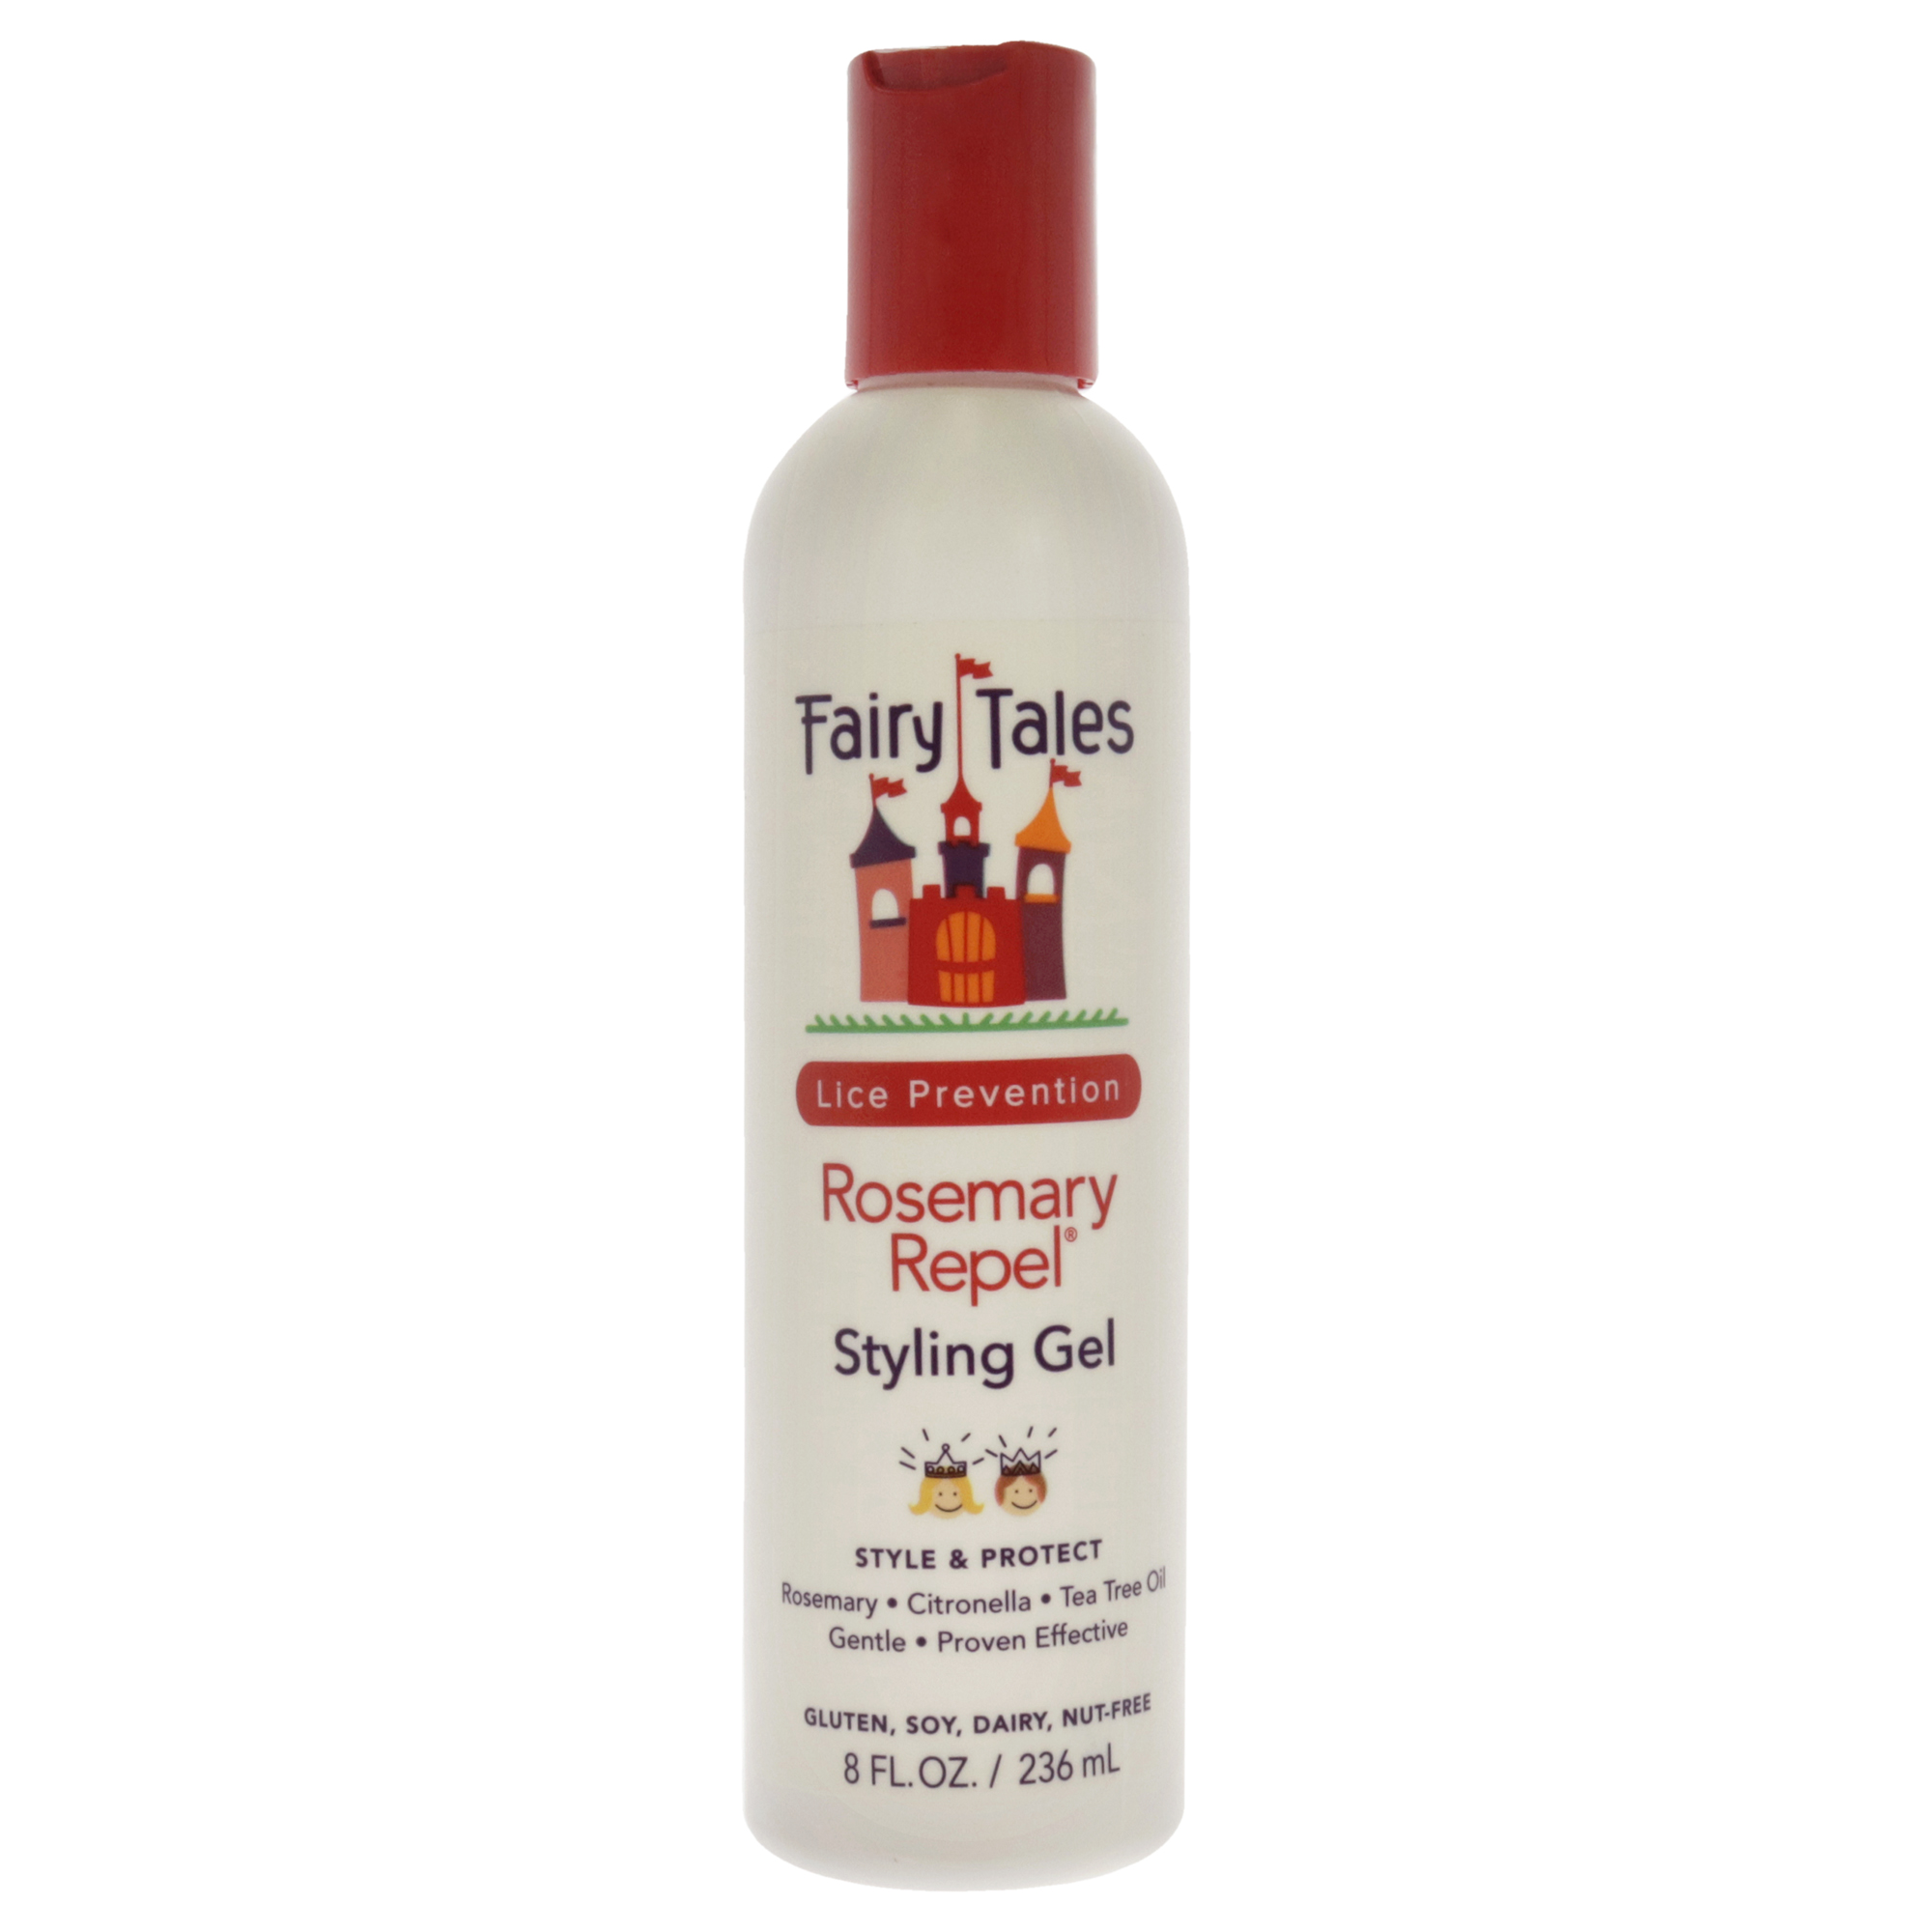 Rosemary Repel Styling Gel by Fairy Tales for Kids - 8 oz Gel